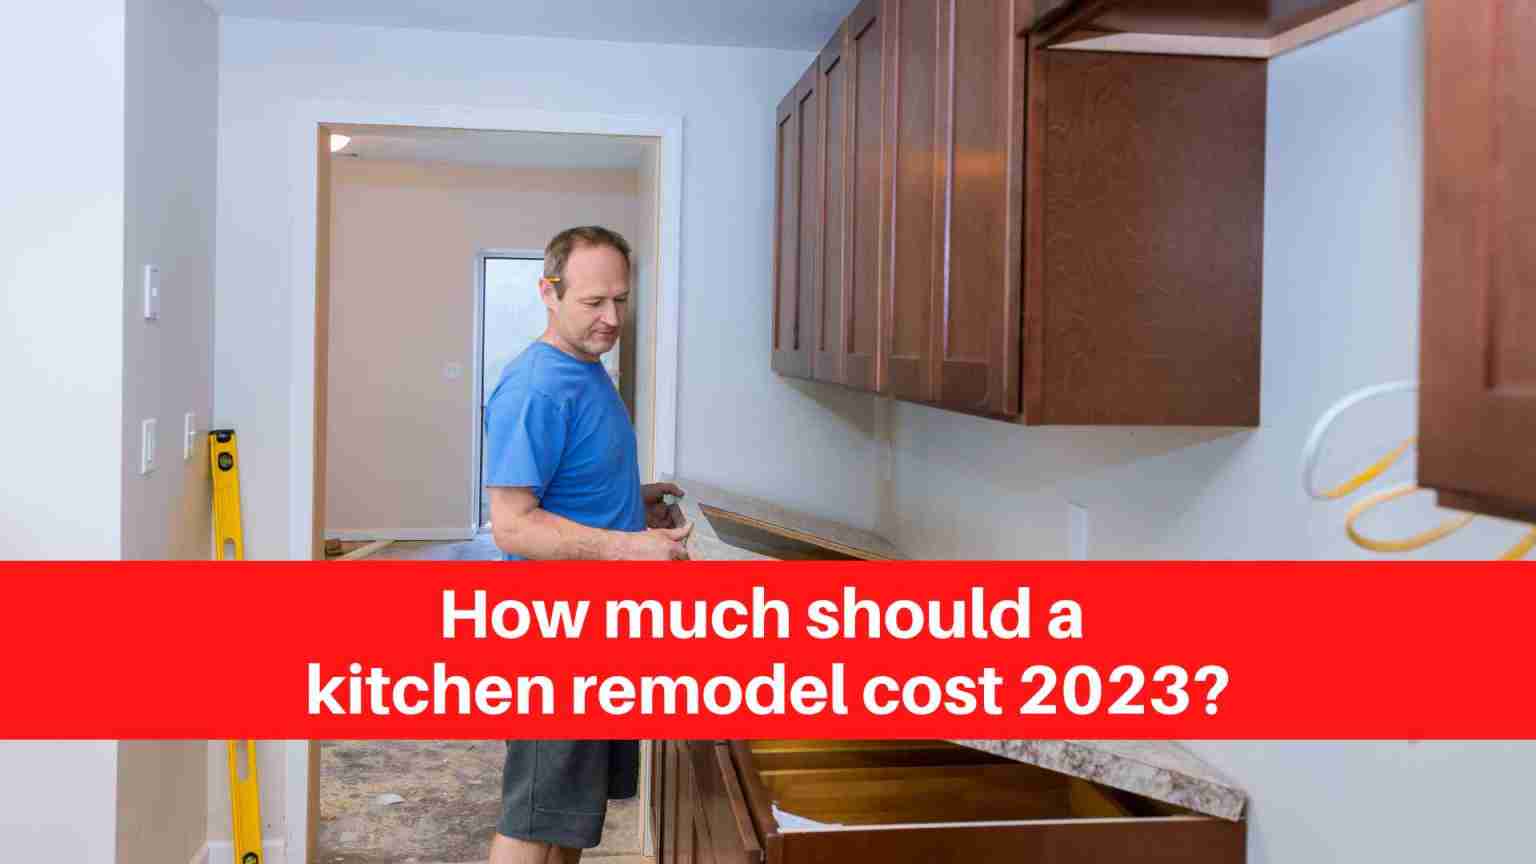 How much should a kitchen remodel cost 2023